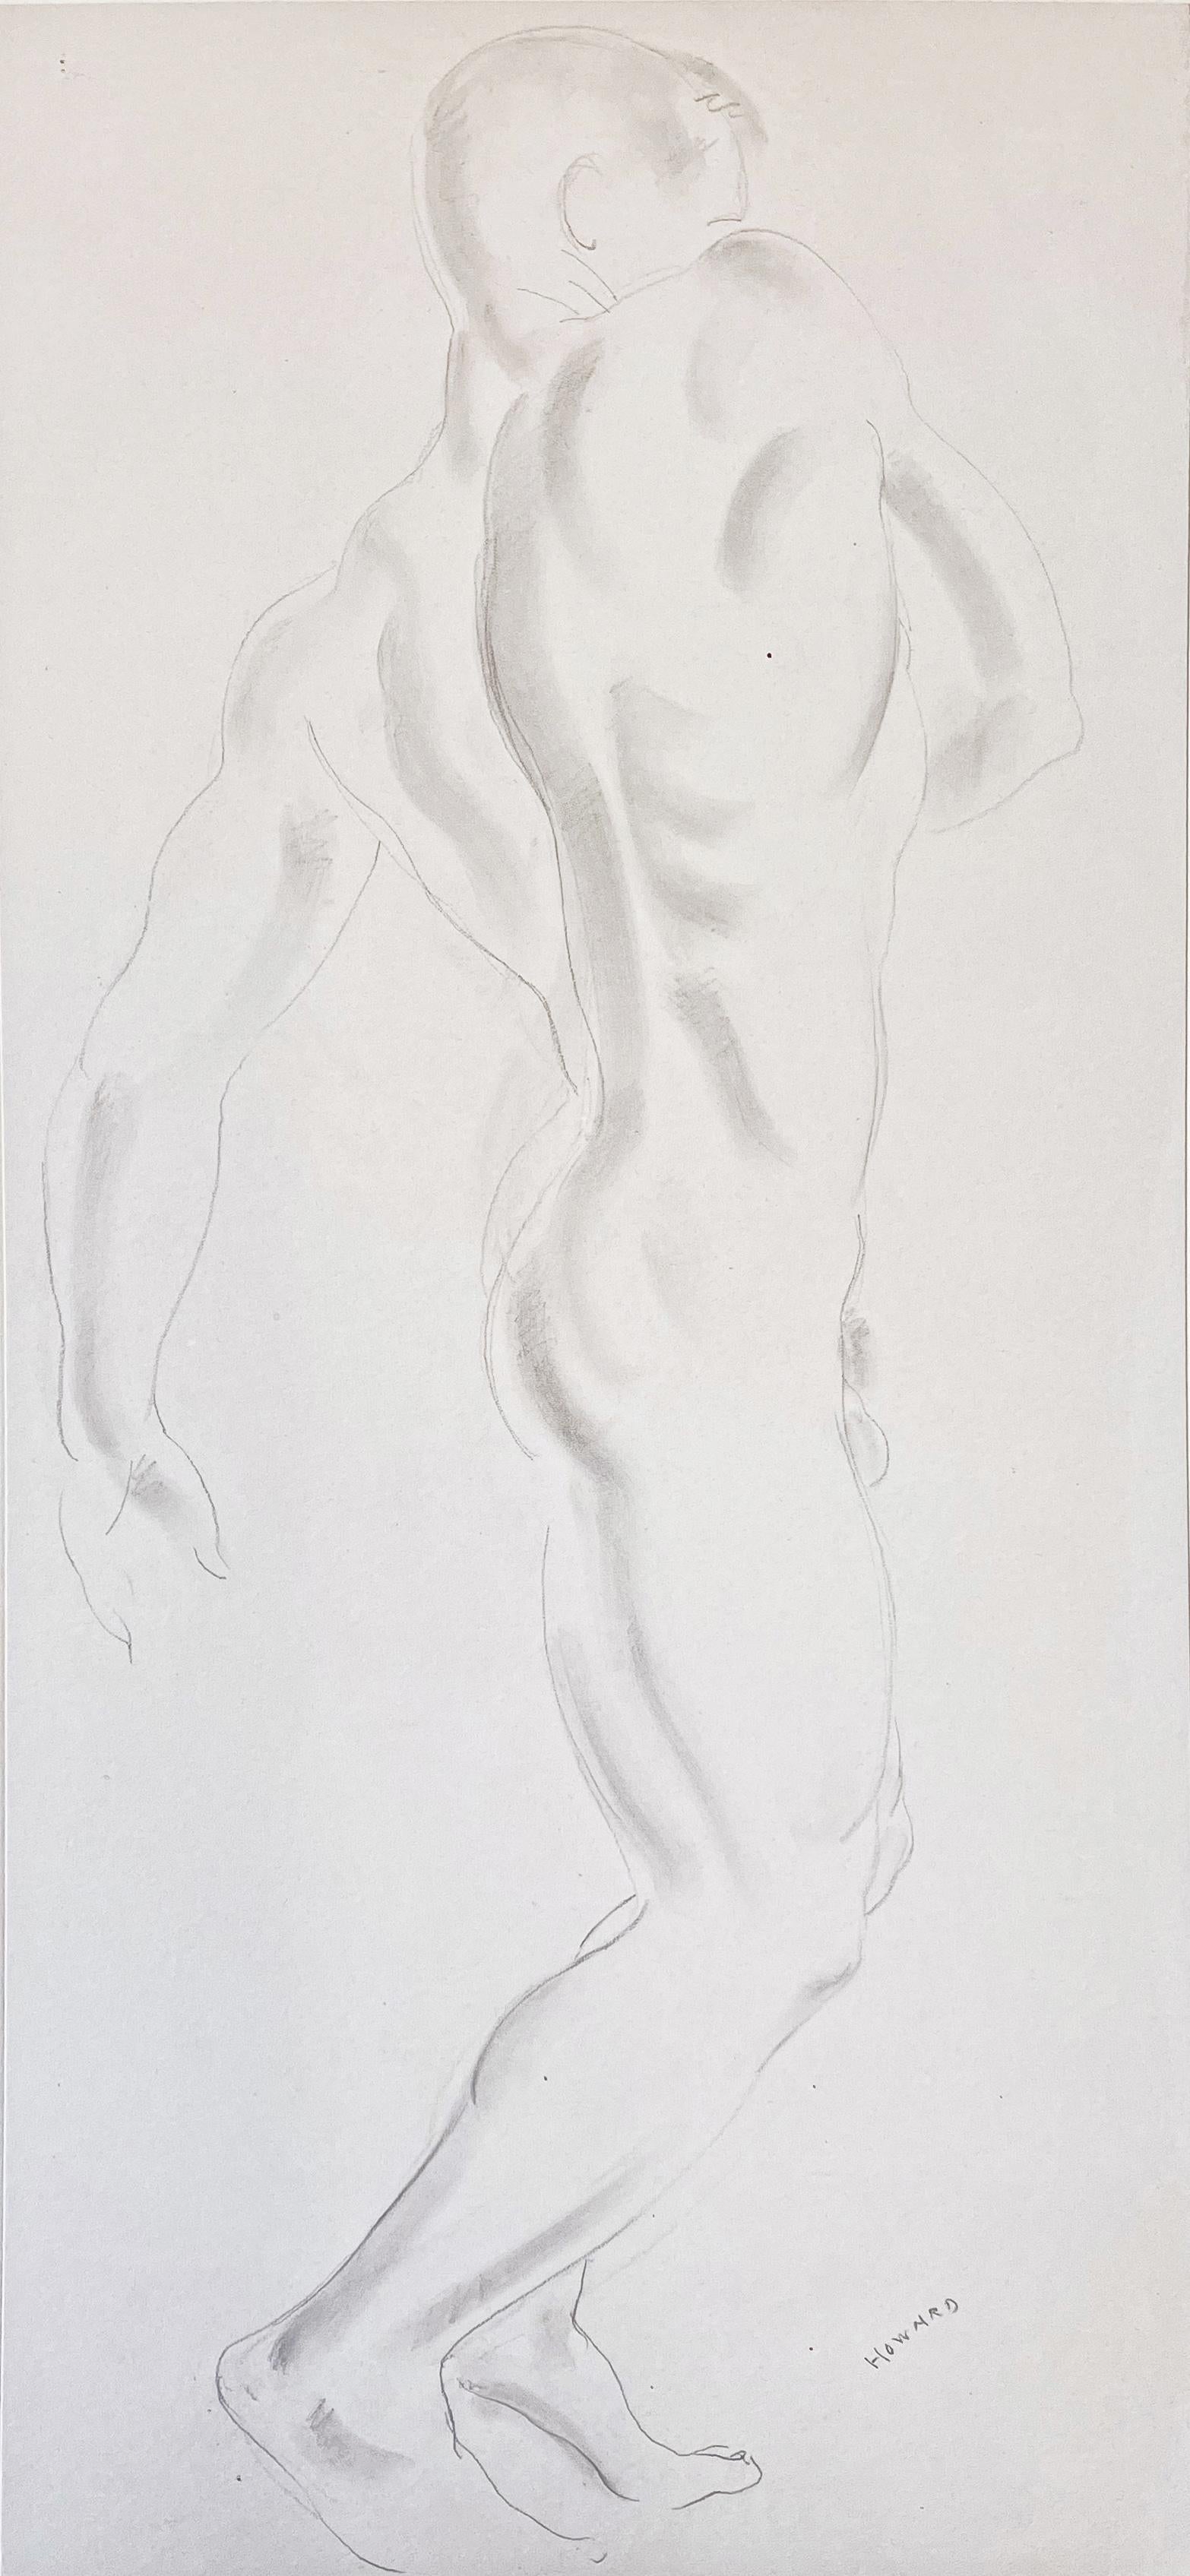 Exquisitely drawn in pencil and a feather light ink wash, creating a pale, ghostly image that is refined and haunting, this full length view of a male nude from the side was accomplished by Cecil de Blaquiere Howard, the extraordinarily accomplished